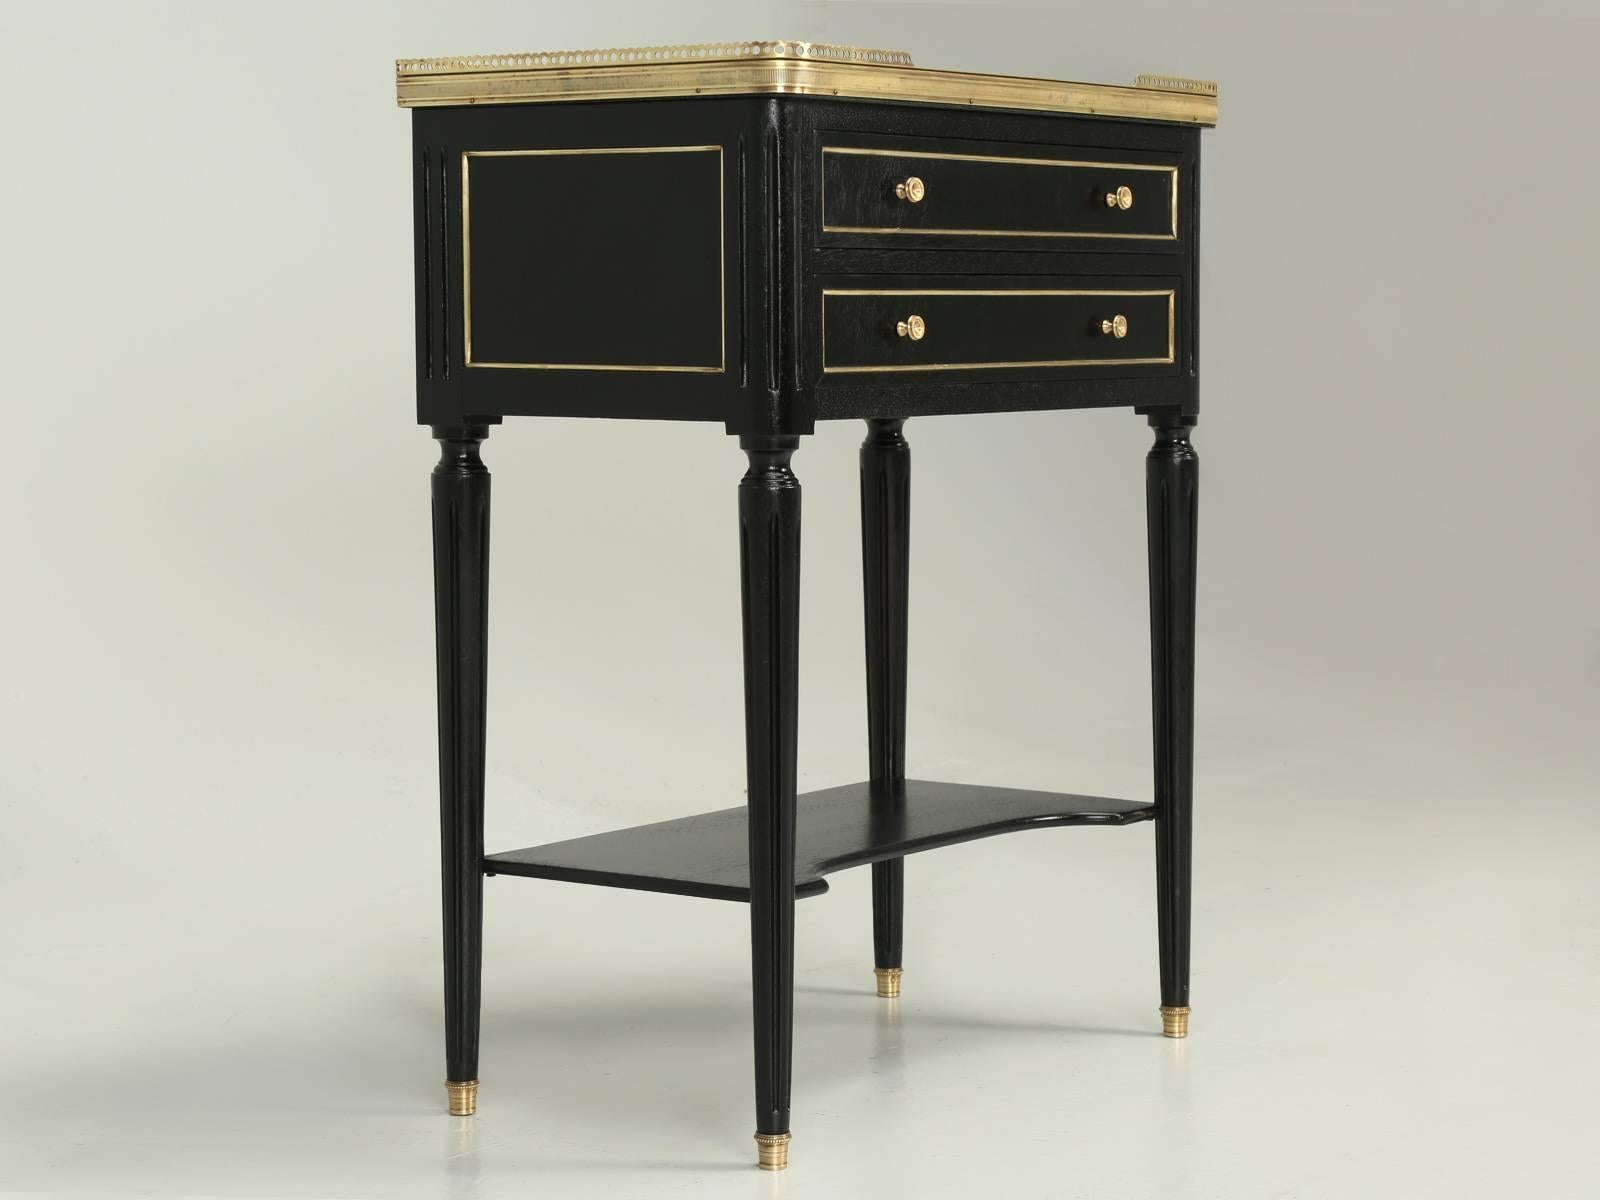 Antique French Louis XVI Style End, or Side table, or could even be used as a night stand. Our Old Plank finishing department, hand-scraped off the old worn lacquer and applied an ebonized finish, that still allows for the grain of the mahogany to